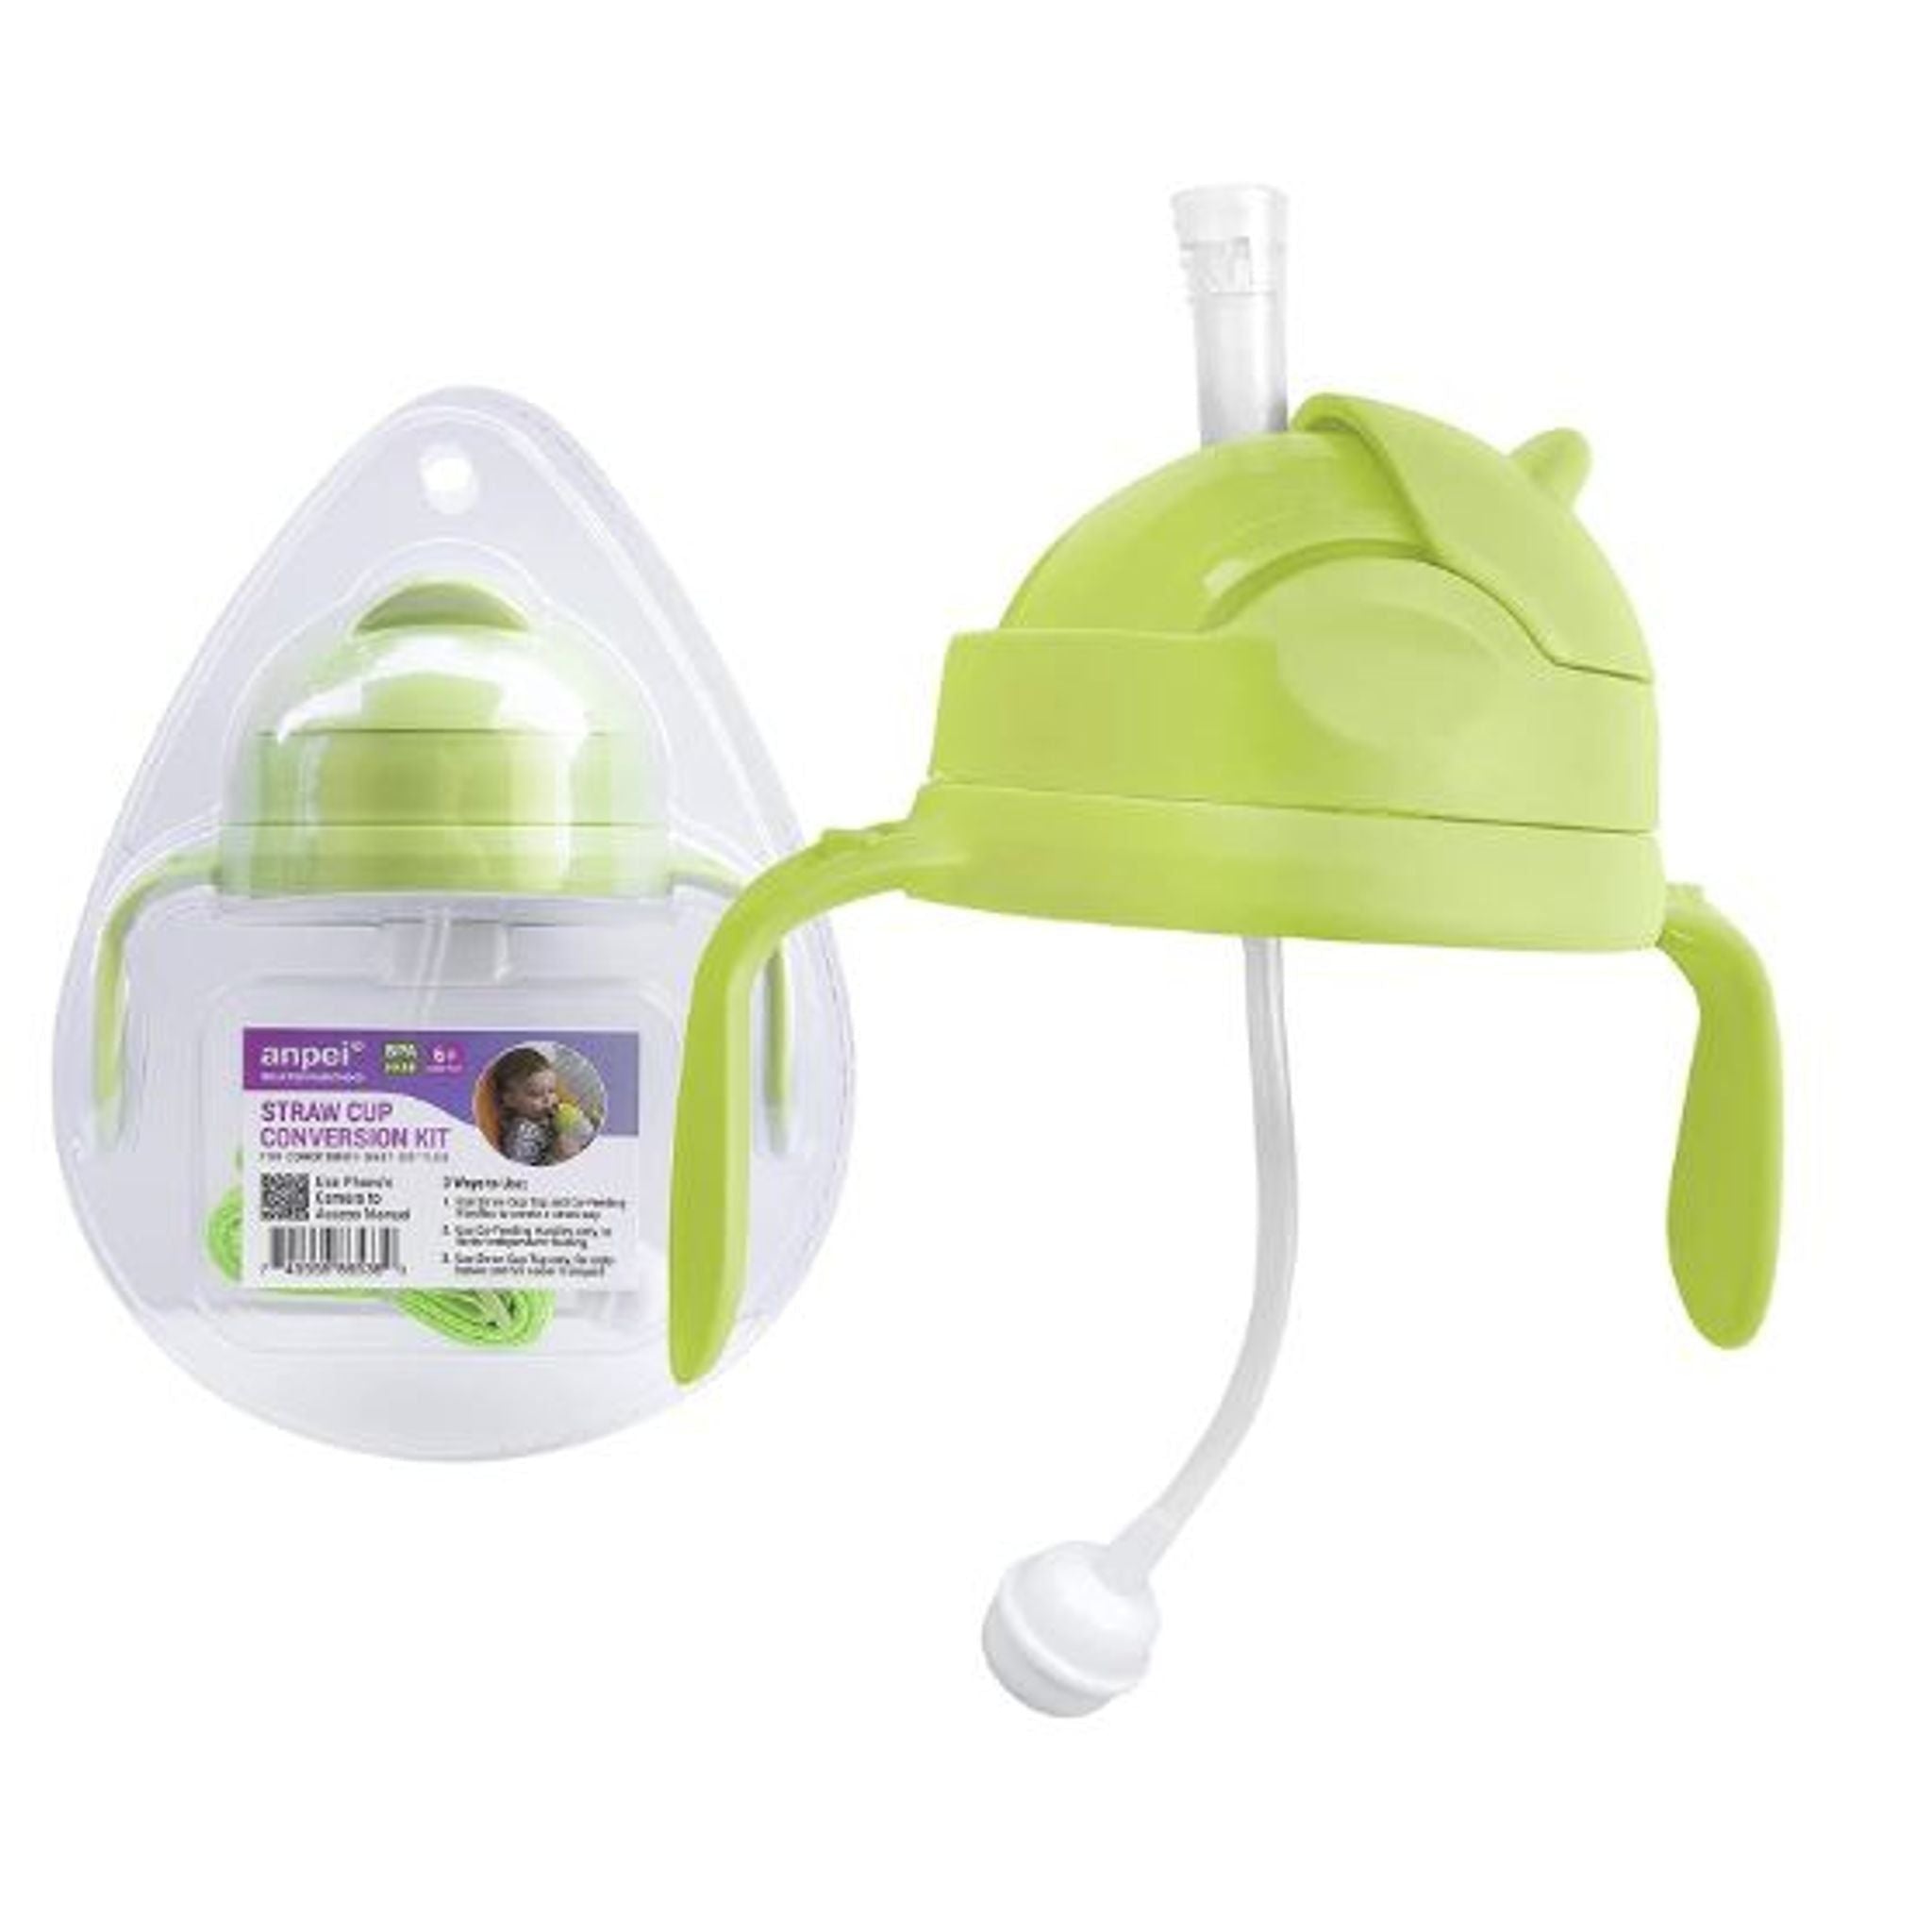 Anpei 3-in-1 Straw Sippy Cup Conversion Kit for Comotomo Baby Bottle, 5 Ounce and 8 Ounce (Weighted Straw, Green)